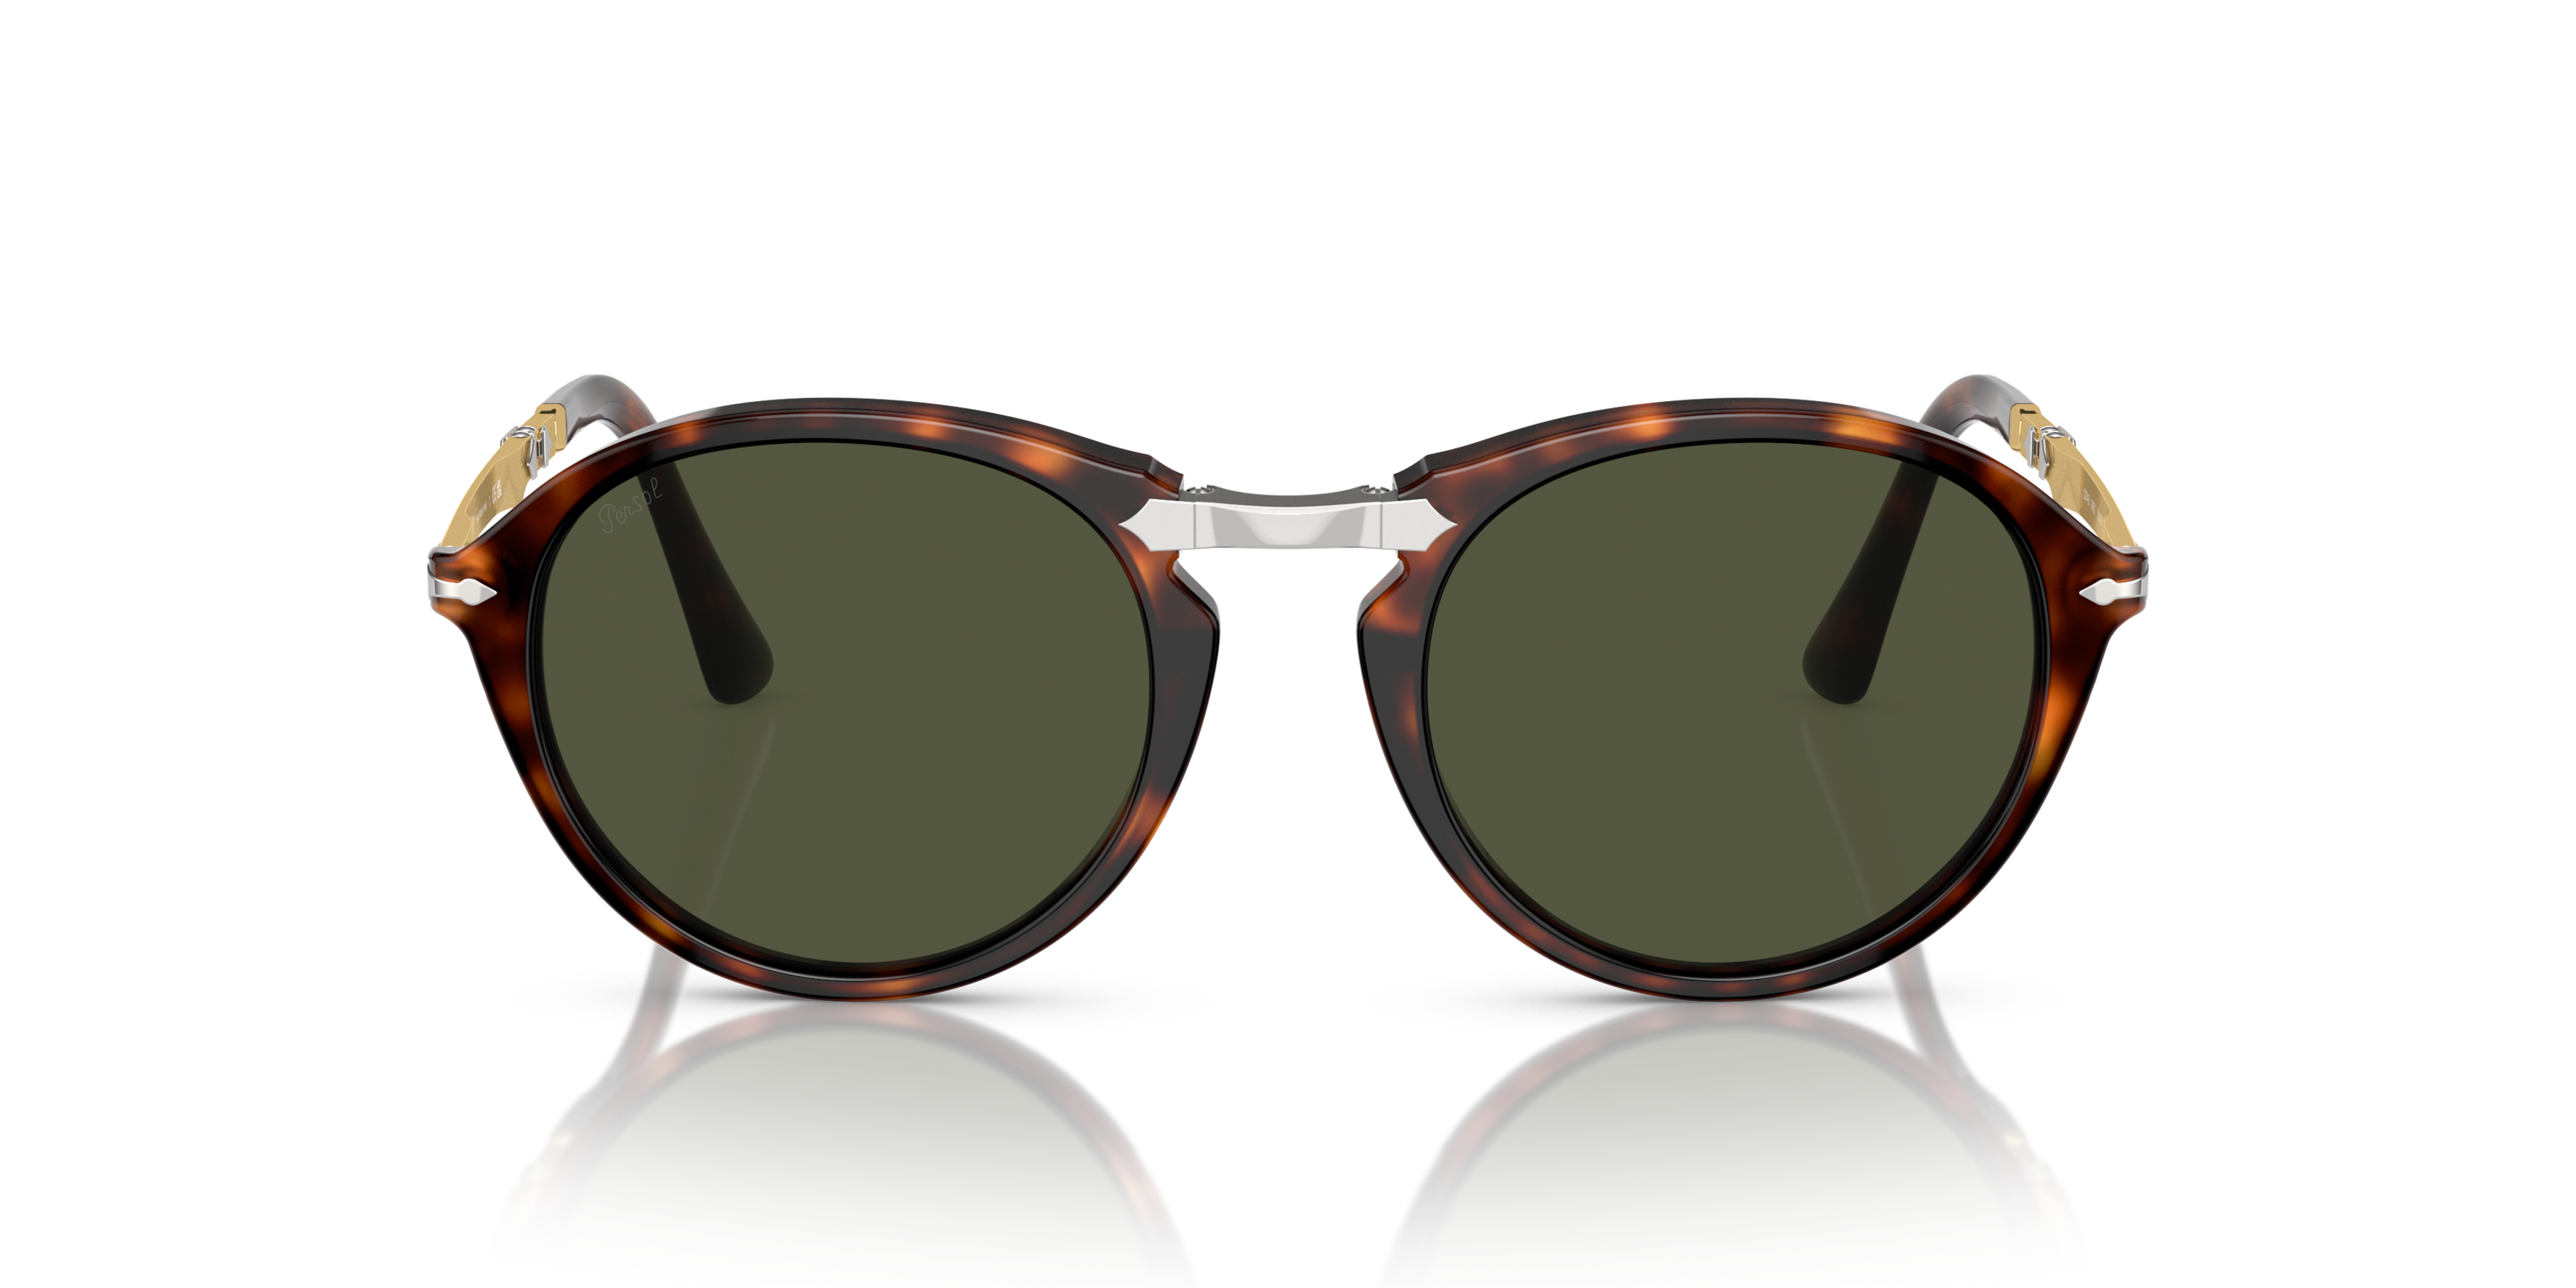 [products.image.front] PERSOL PO3274S 24/31